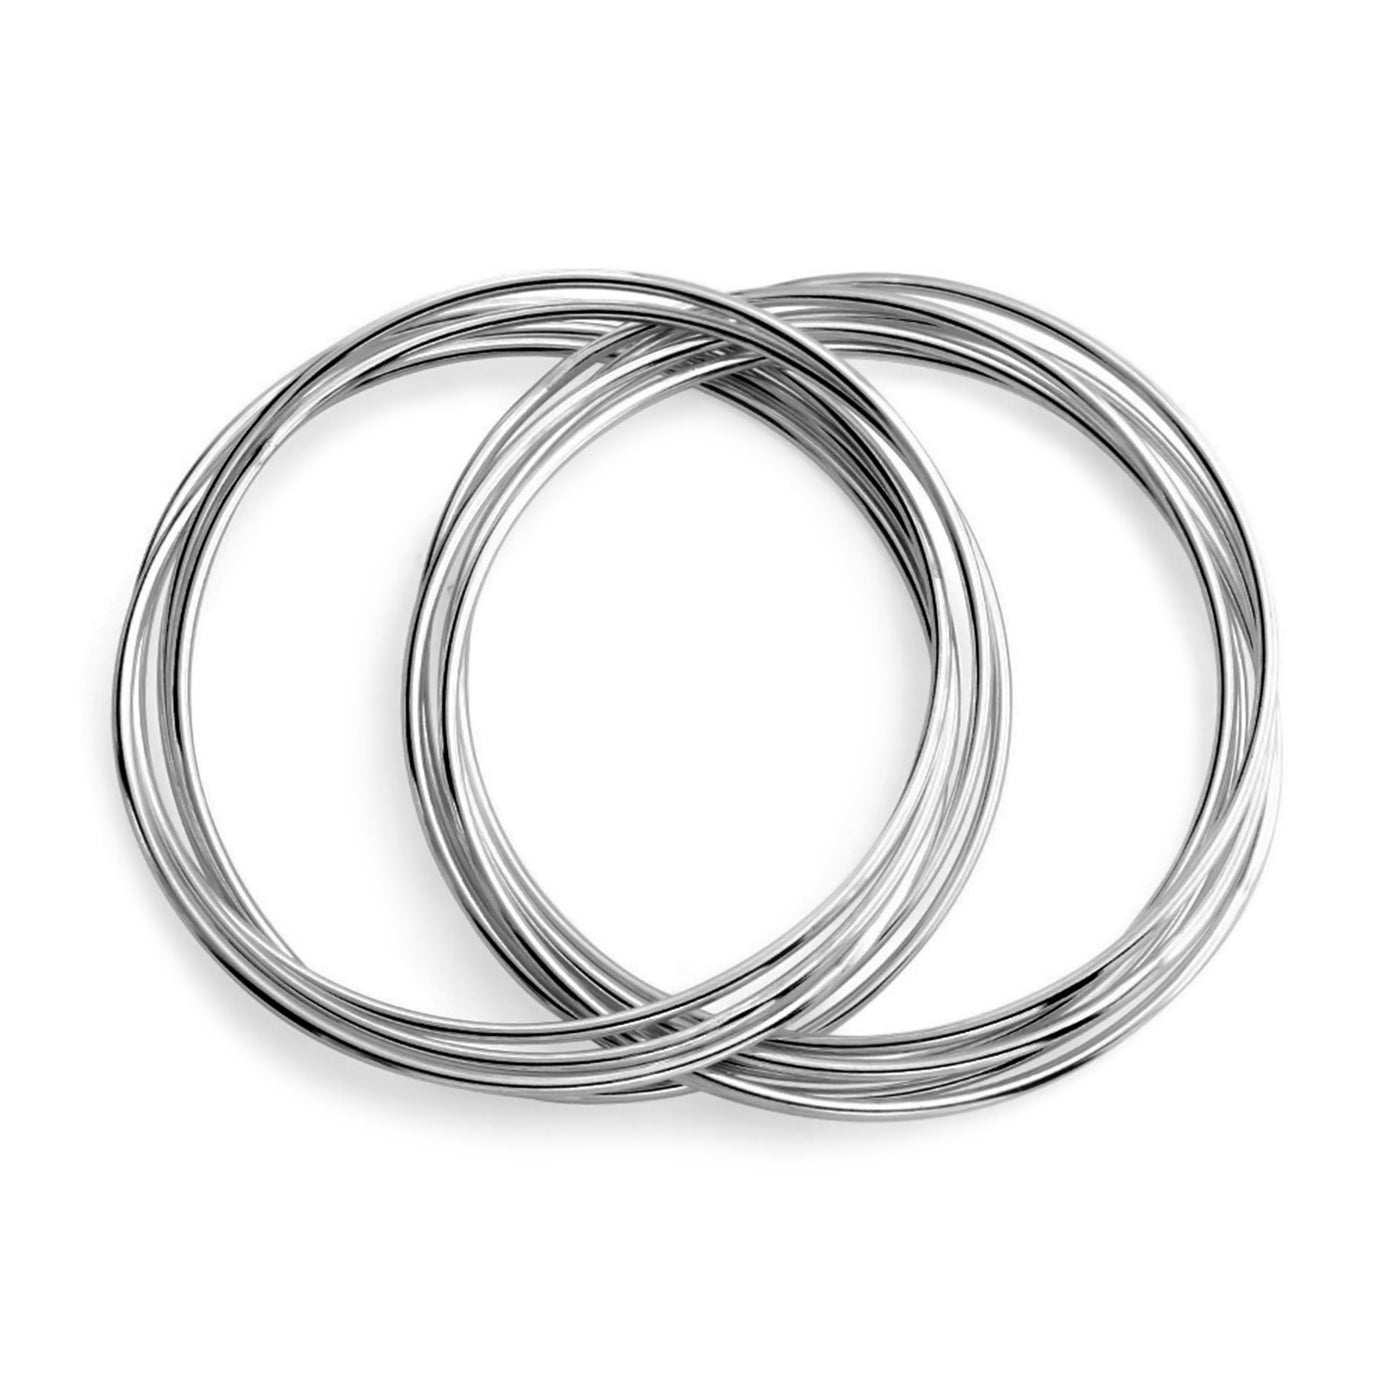 Amazon.com: Bling Jewelry Set of 10 Interlocking Twist Multi Stacking Bangle  for Women Bracelets Round Smooth Thin Silver Tone Stainless Steel for Women  Teens: Clothing, Shoes & Jewelry